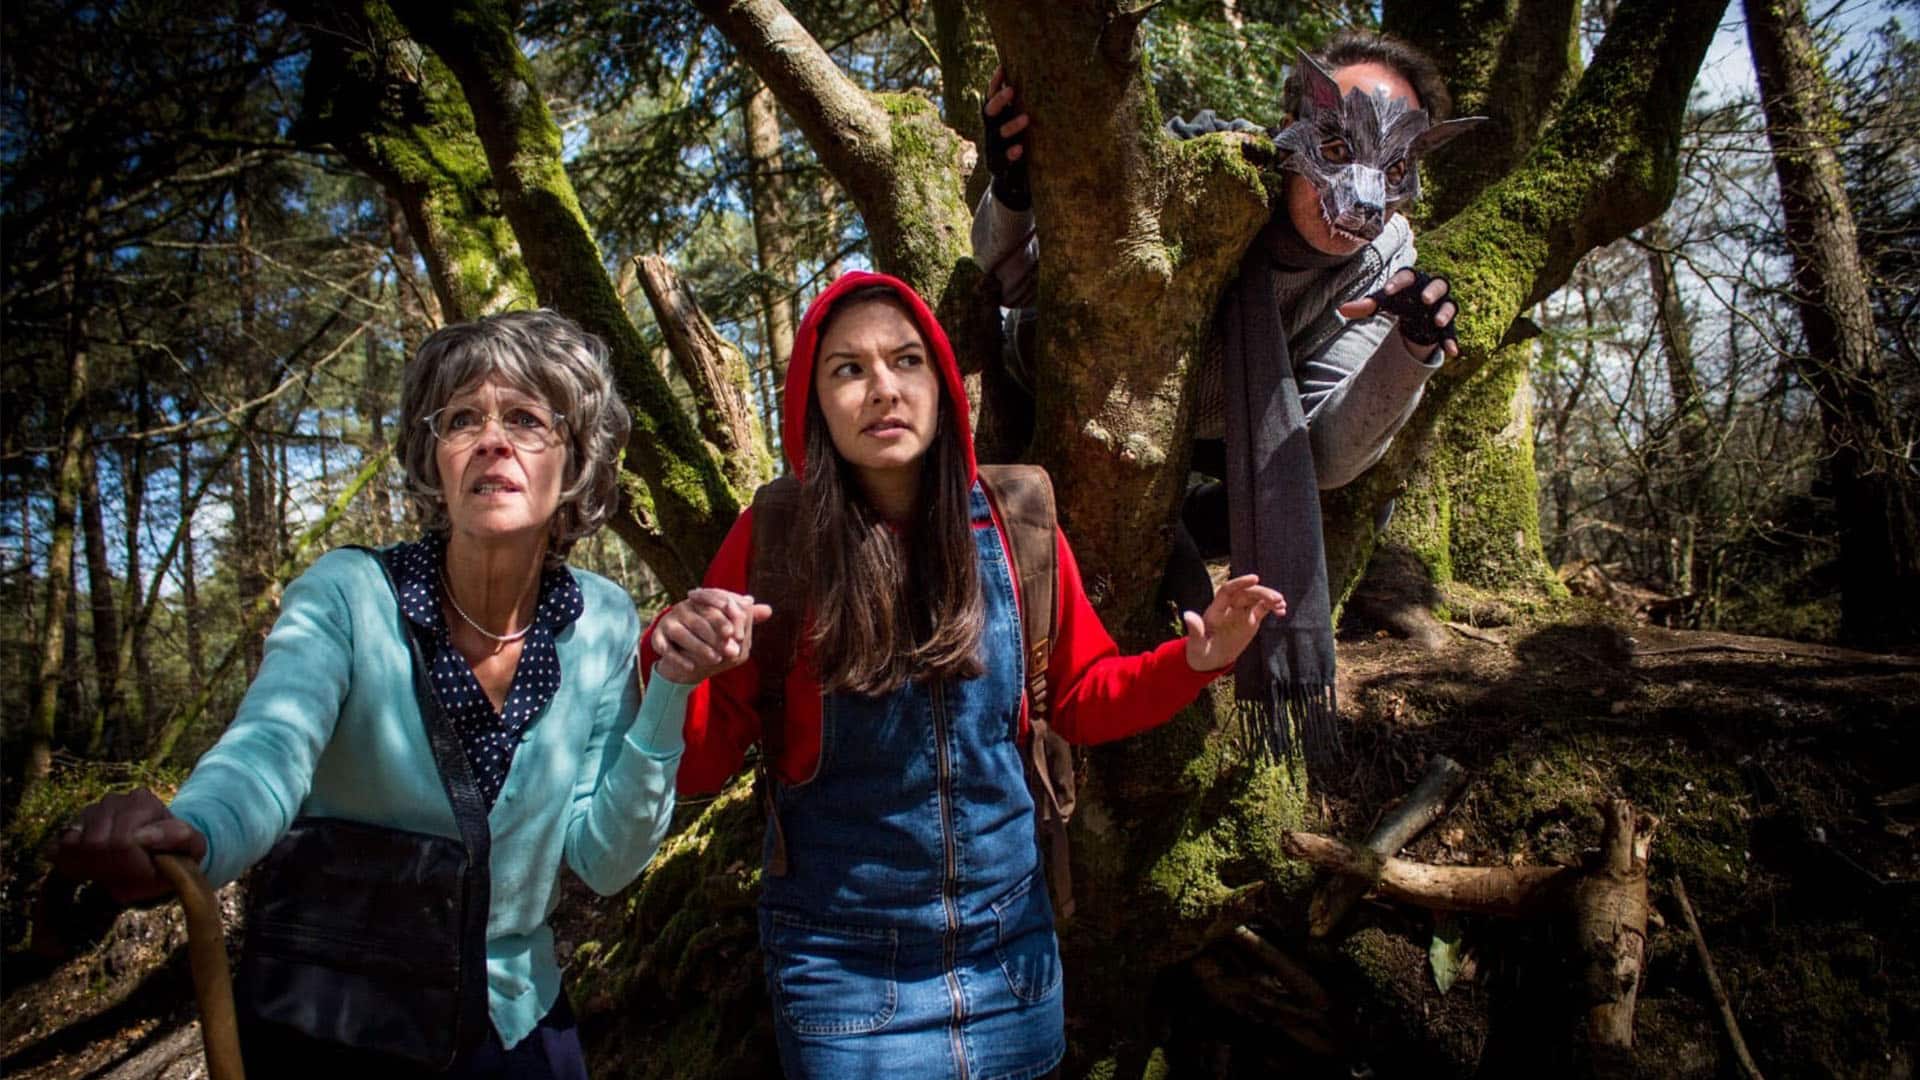 A modern Little Red Riding Hood and grandma are walking through the forest, concerned looks on their faces. A wolf is watching them from a tree right behind them, portrayed by an actor wearing grey clothing, a grey scarf, fingerless gloves and a very intricate and geometric wolf's mask